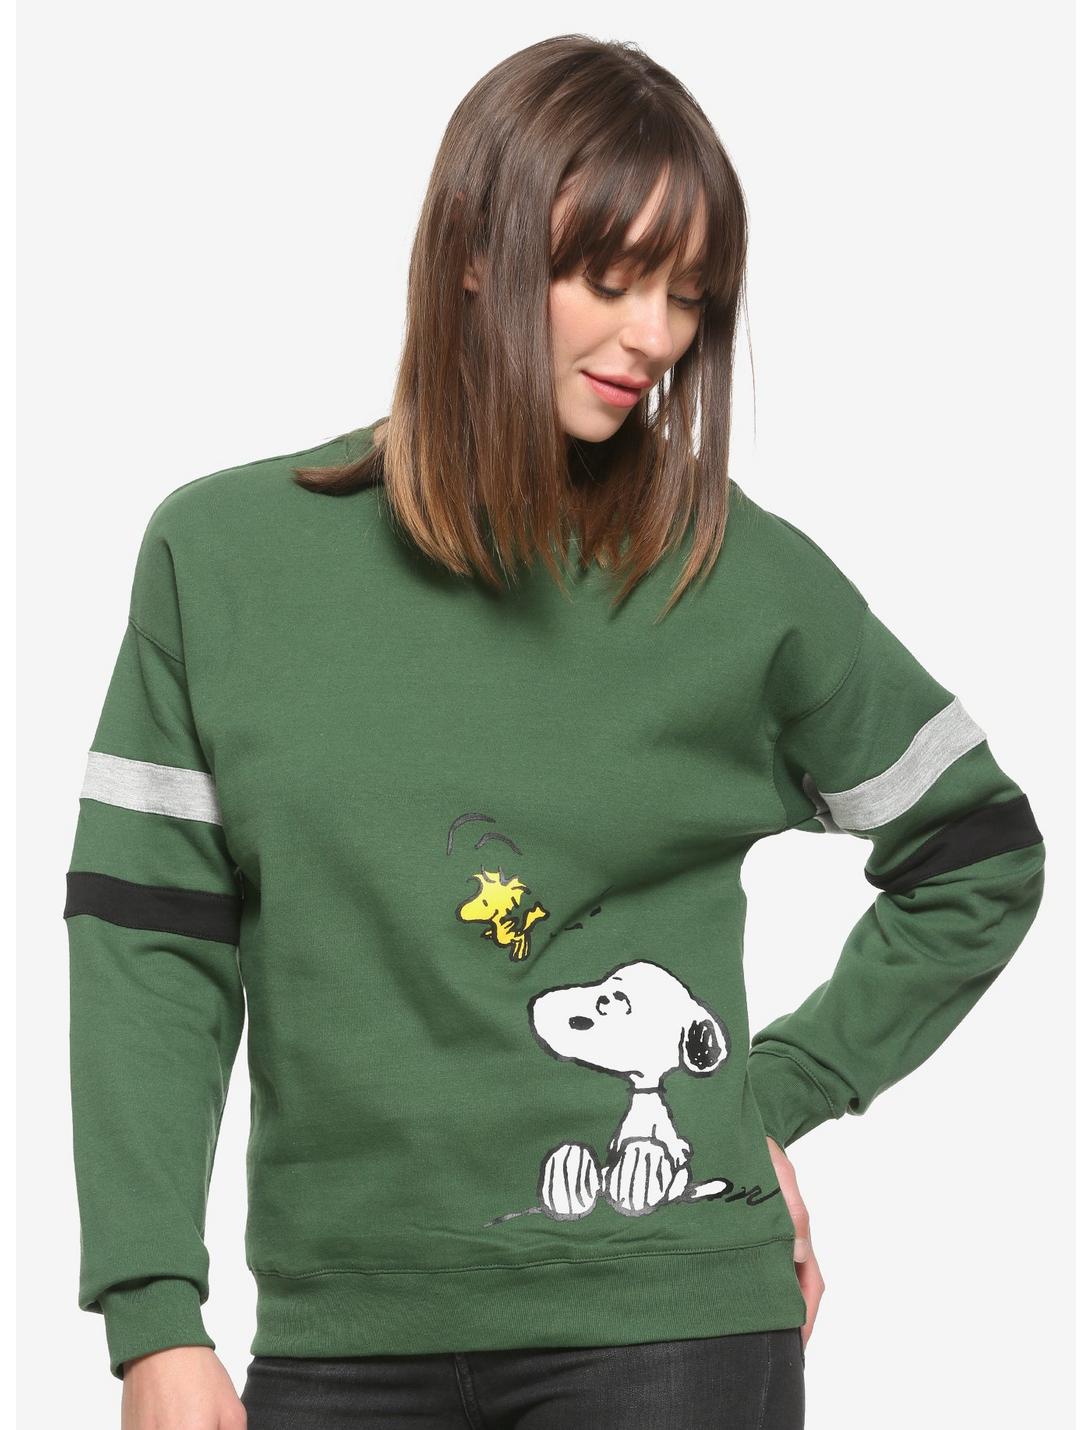 Peanuts Snoopy and Woodstock Stripe Sleeved Women's Crewneck - BoxLunch ...